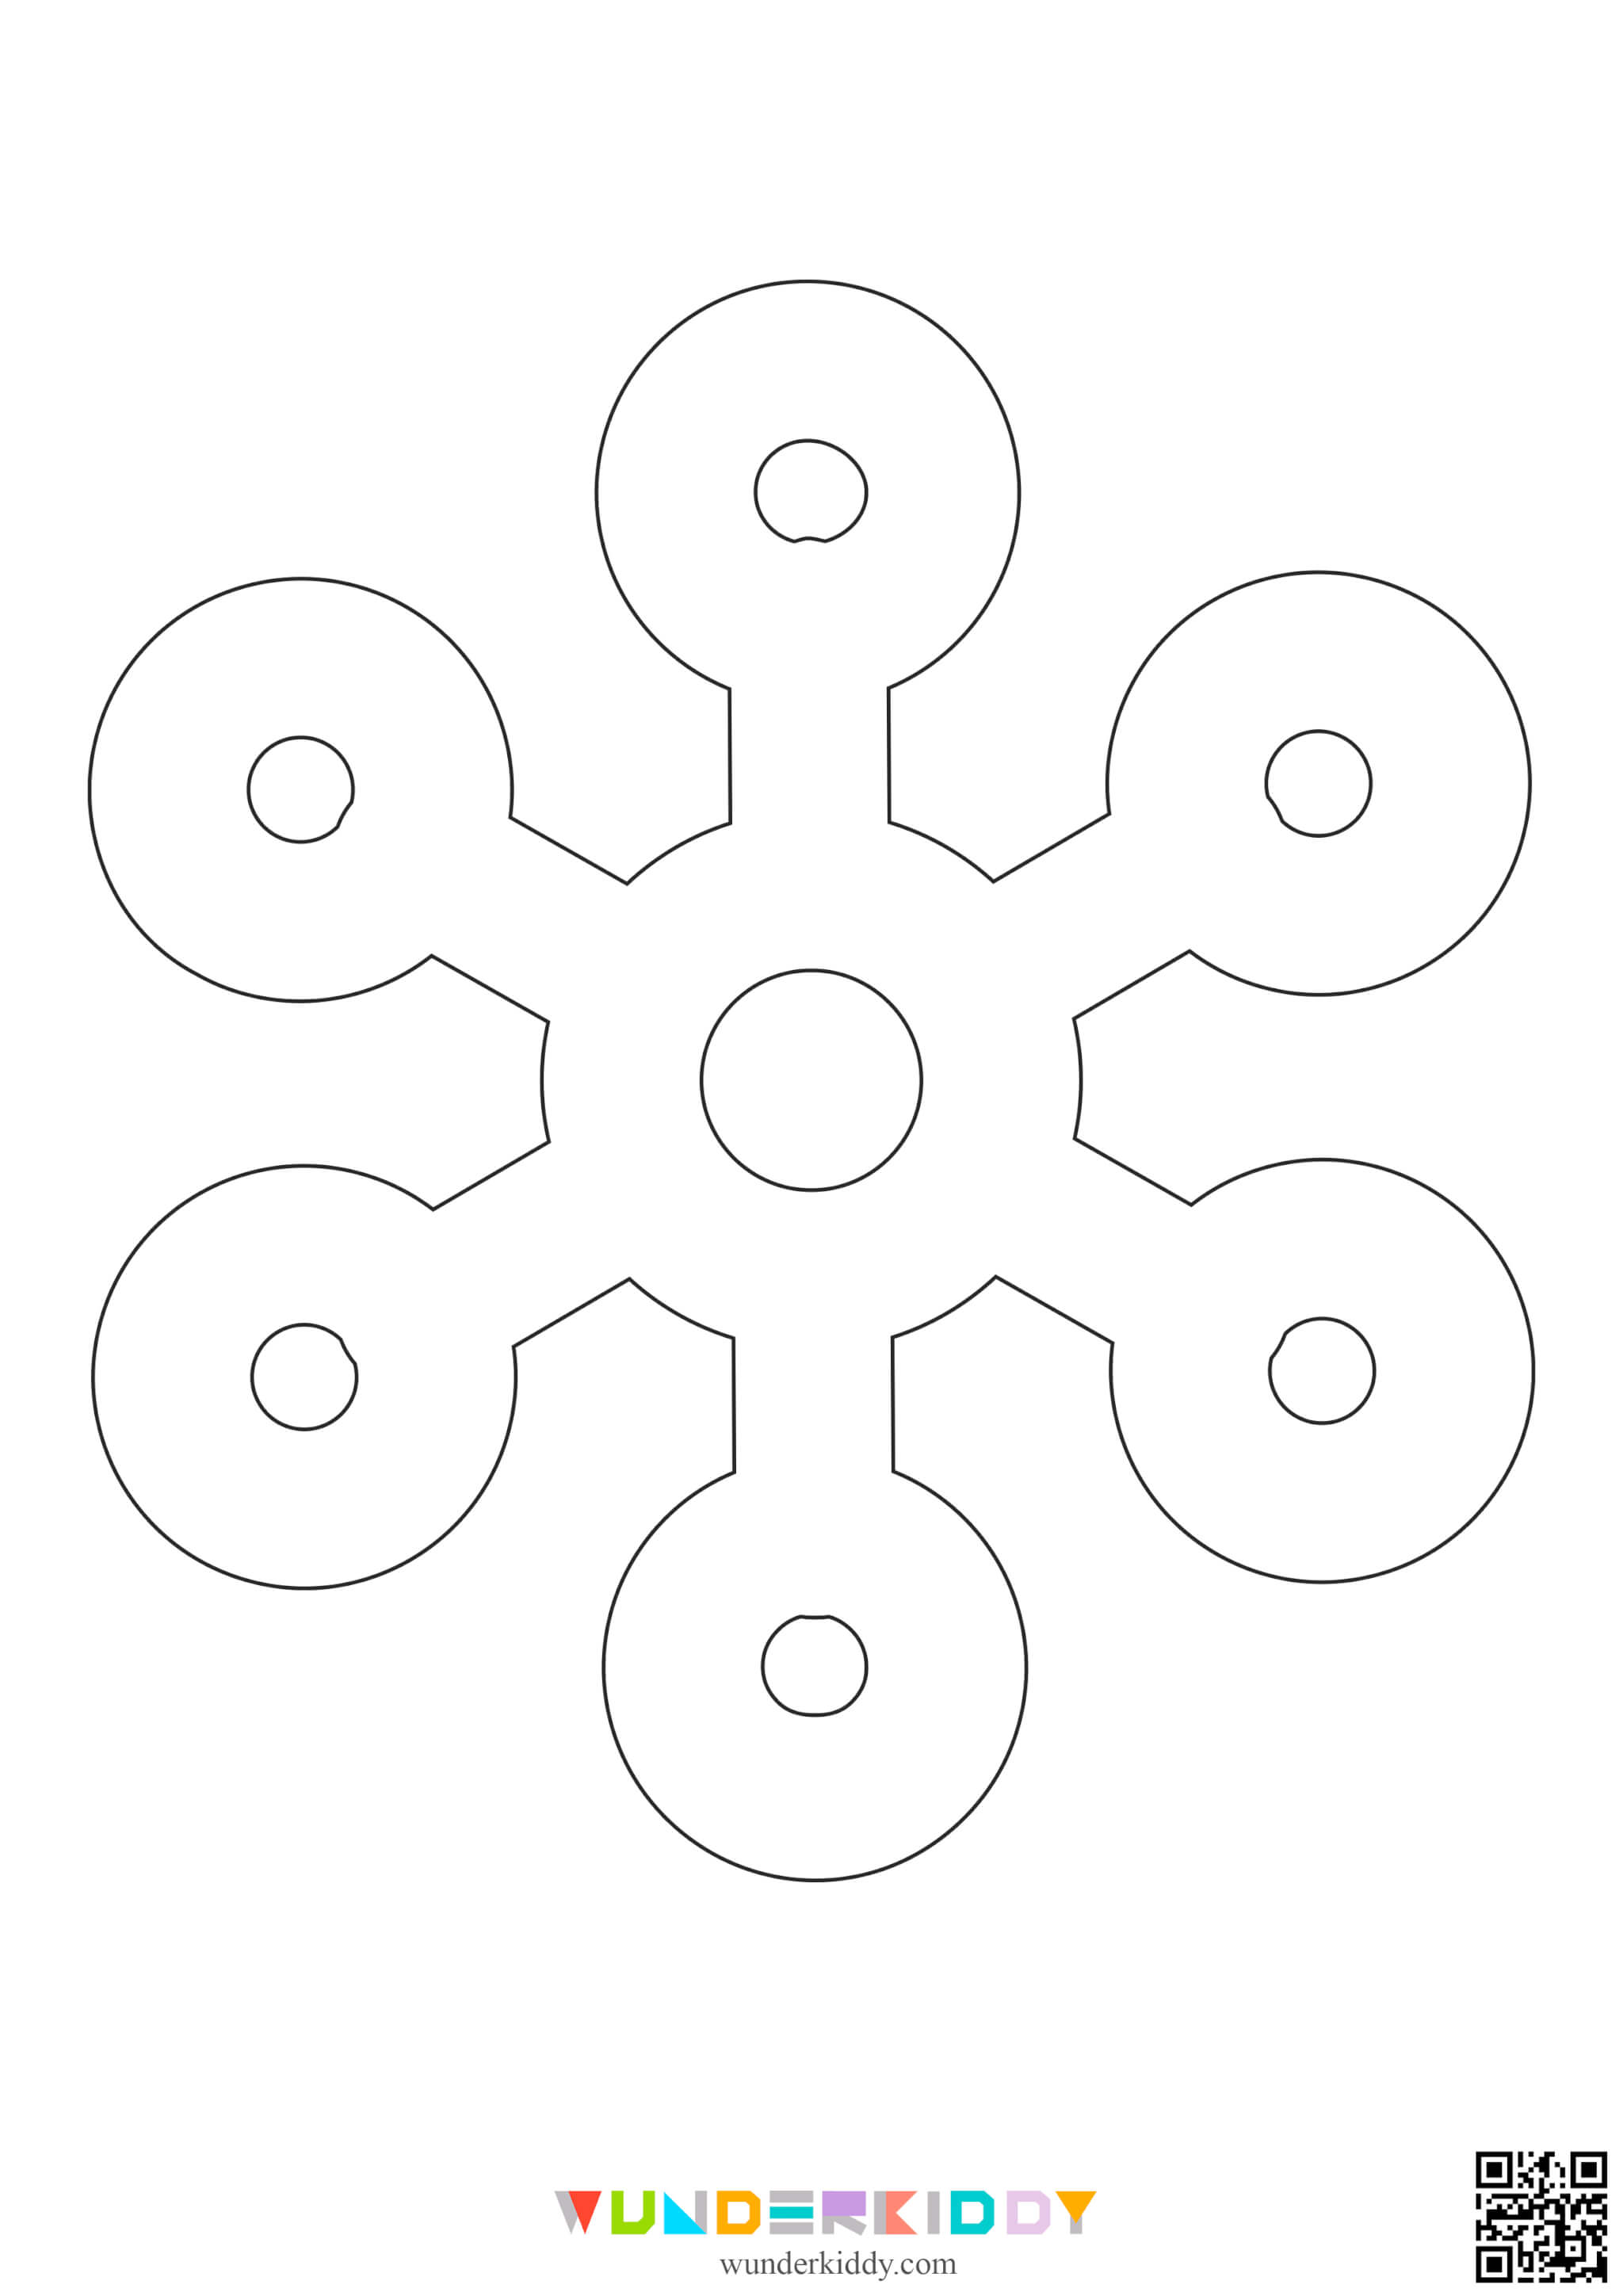 Snowflakes Template - Image 9